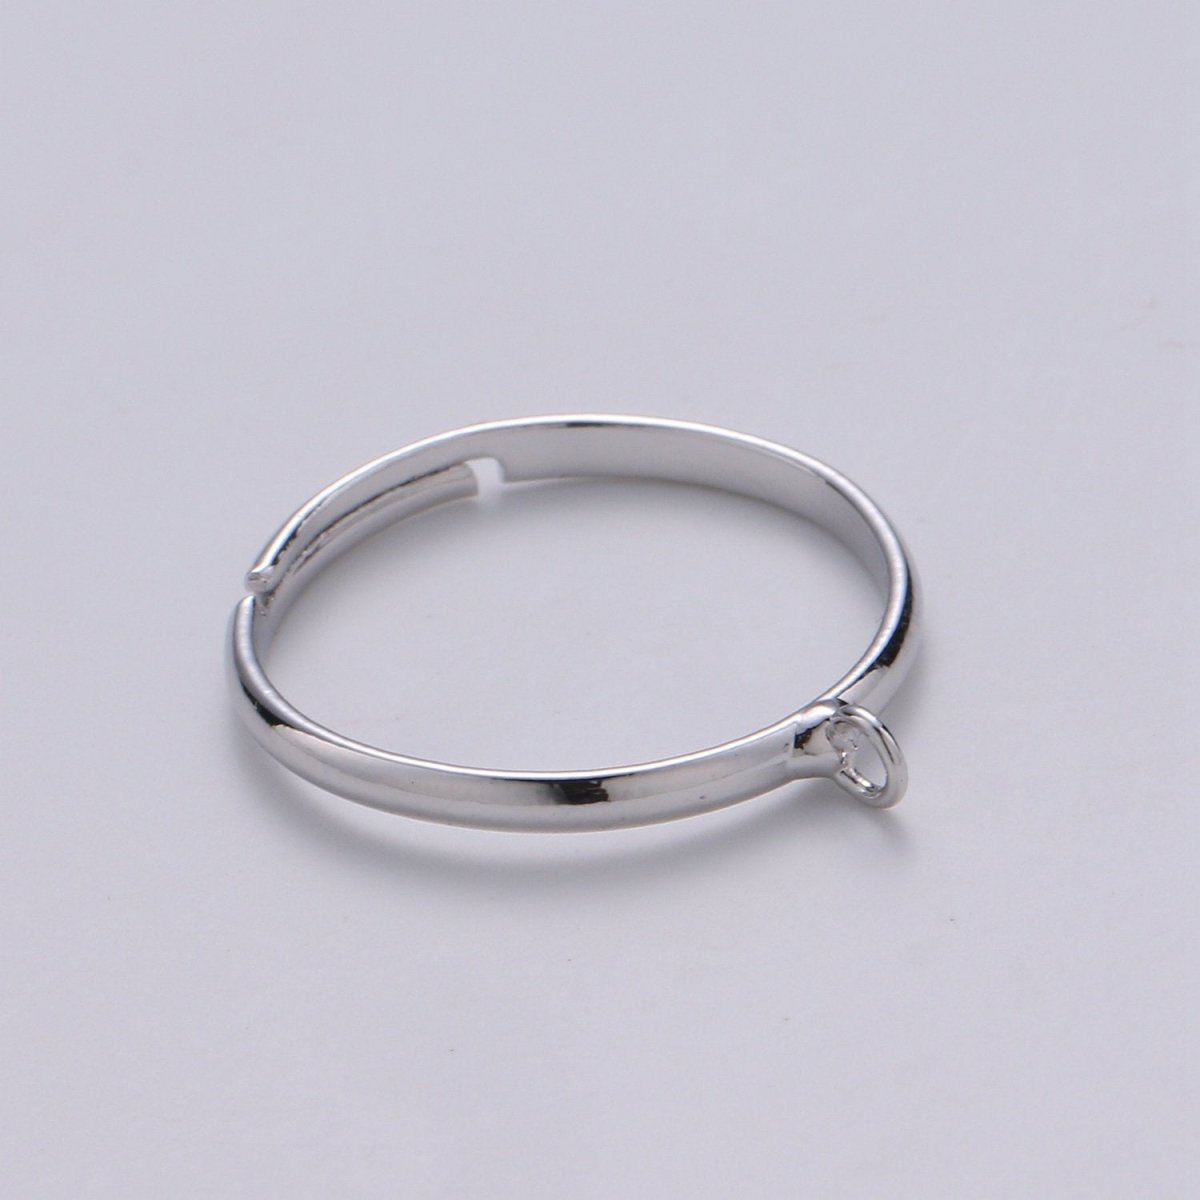 Adjustable Ring with open ring for Charm Gold Finish Rings Silver Ring Wholesale Jewelry Making Affordable Bulk Gold Plated Ring Supply K-815 K-816 - DLUXCA